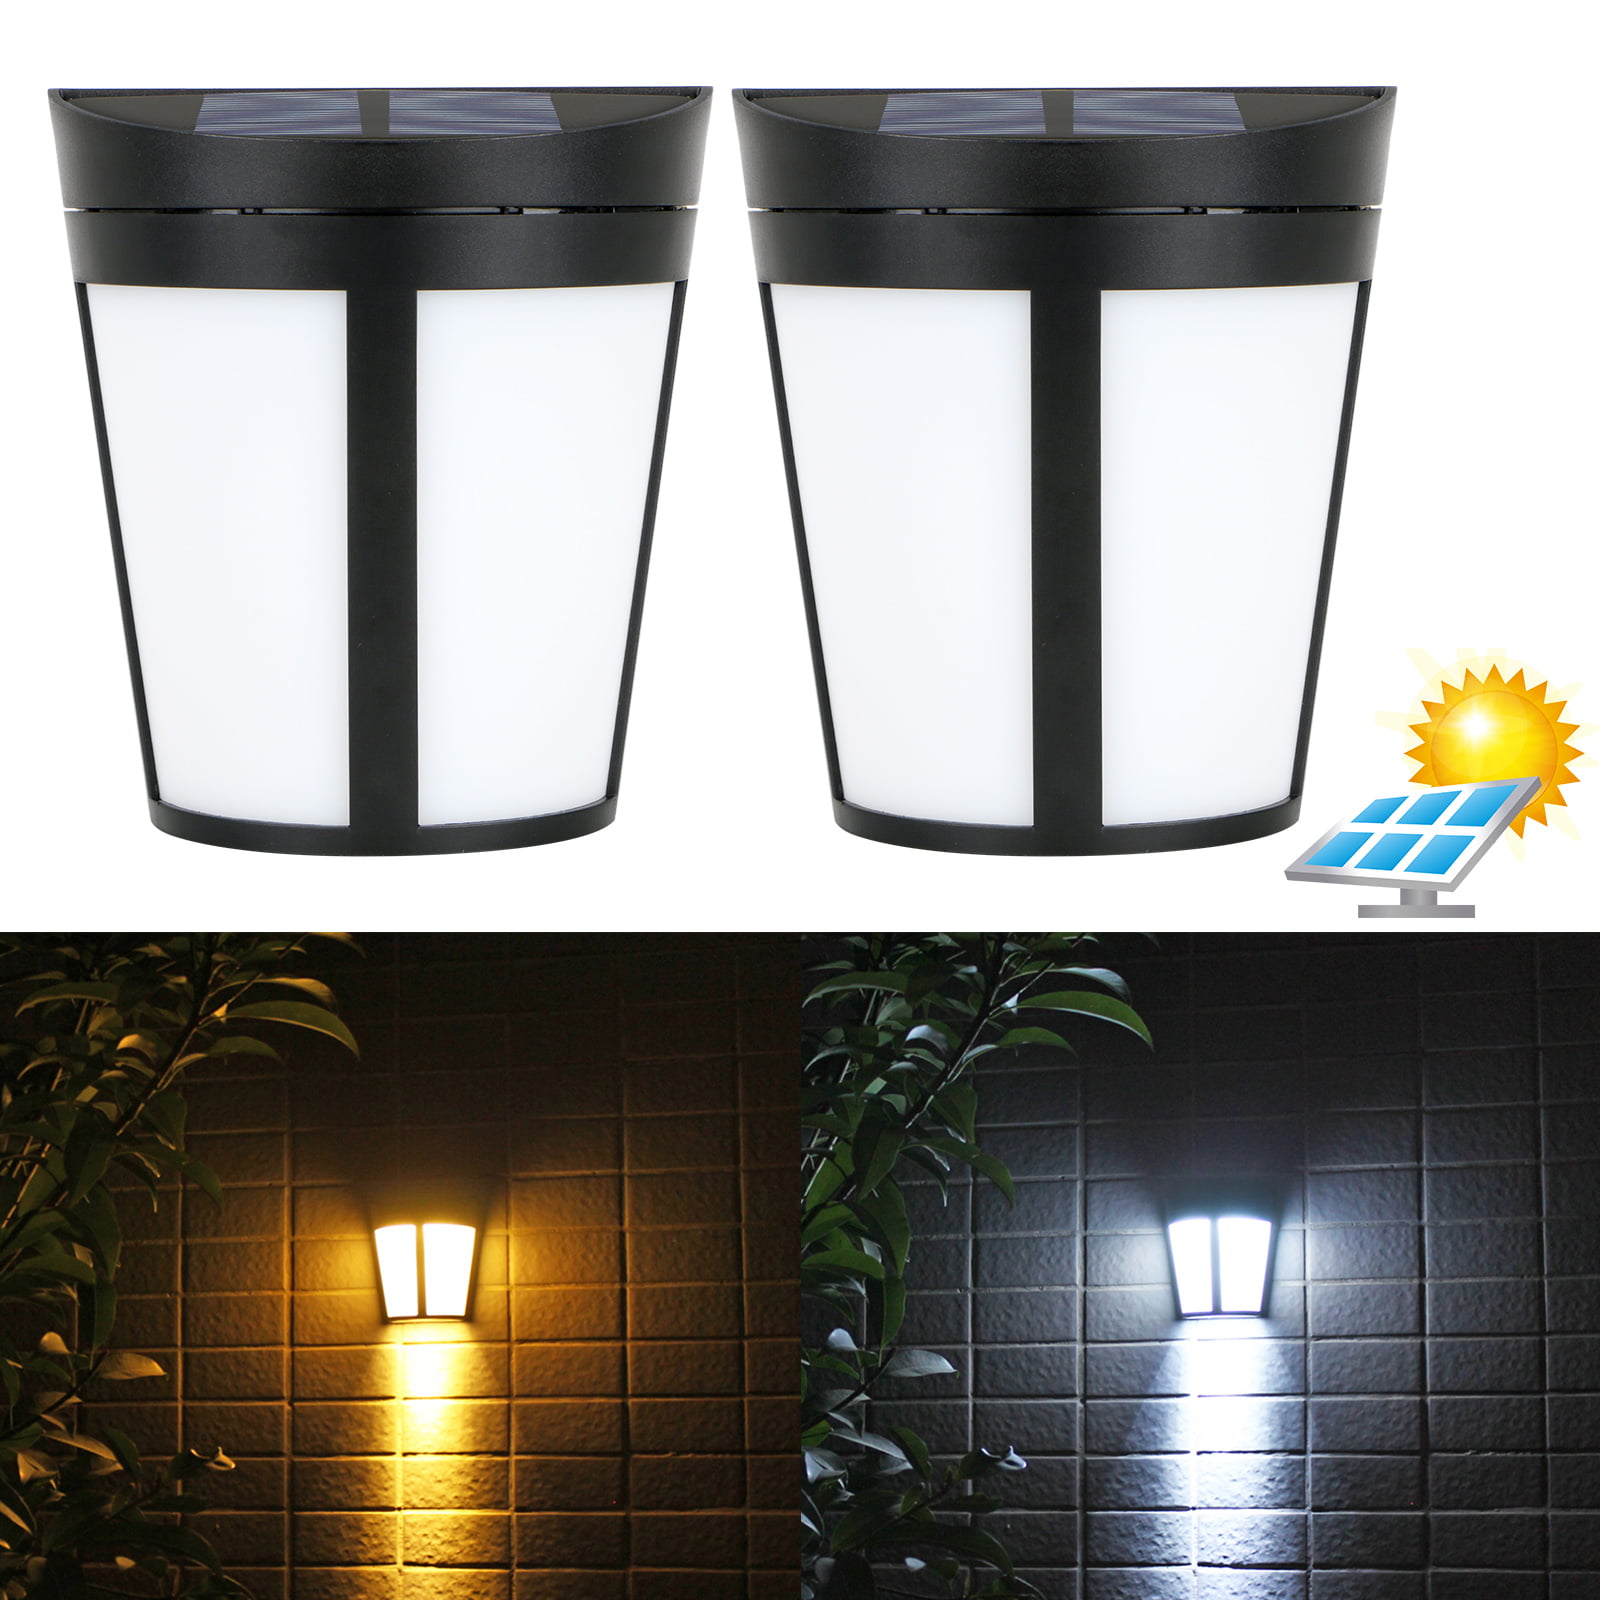 LED Light Wall Mount Solar Powered Outdoor Garden Path Landscape Fence Yard Lamp 